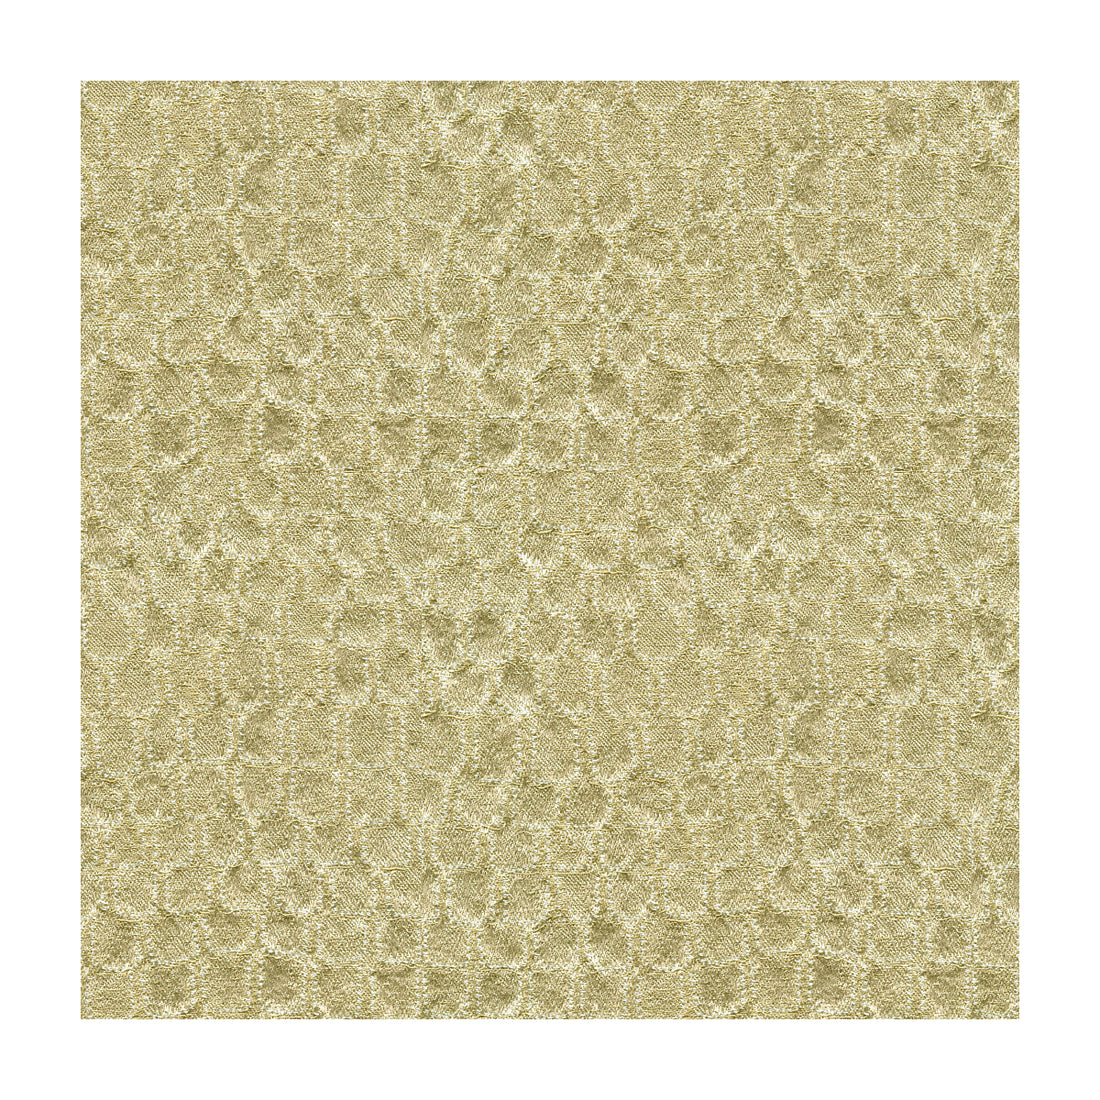 Urban Armor fabric in warm sand color - pattern 33965.1616.0 - by Kravet Couture in the Modern Luxe II collection